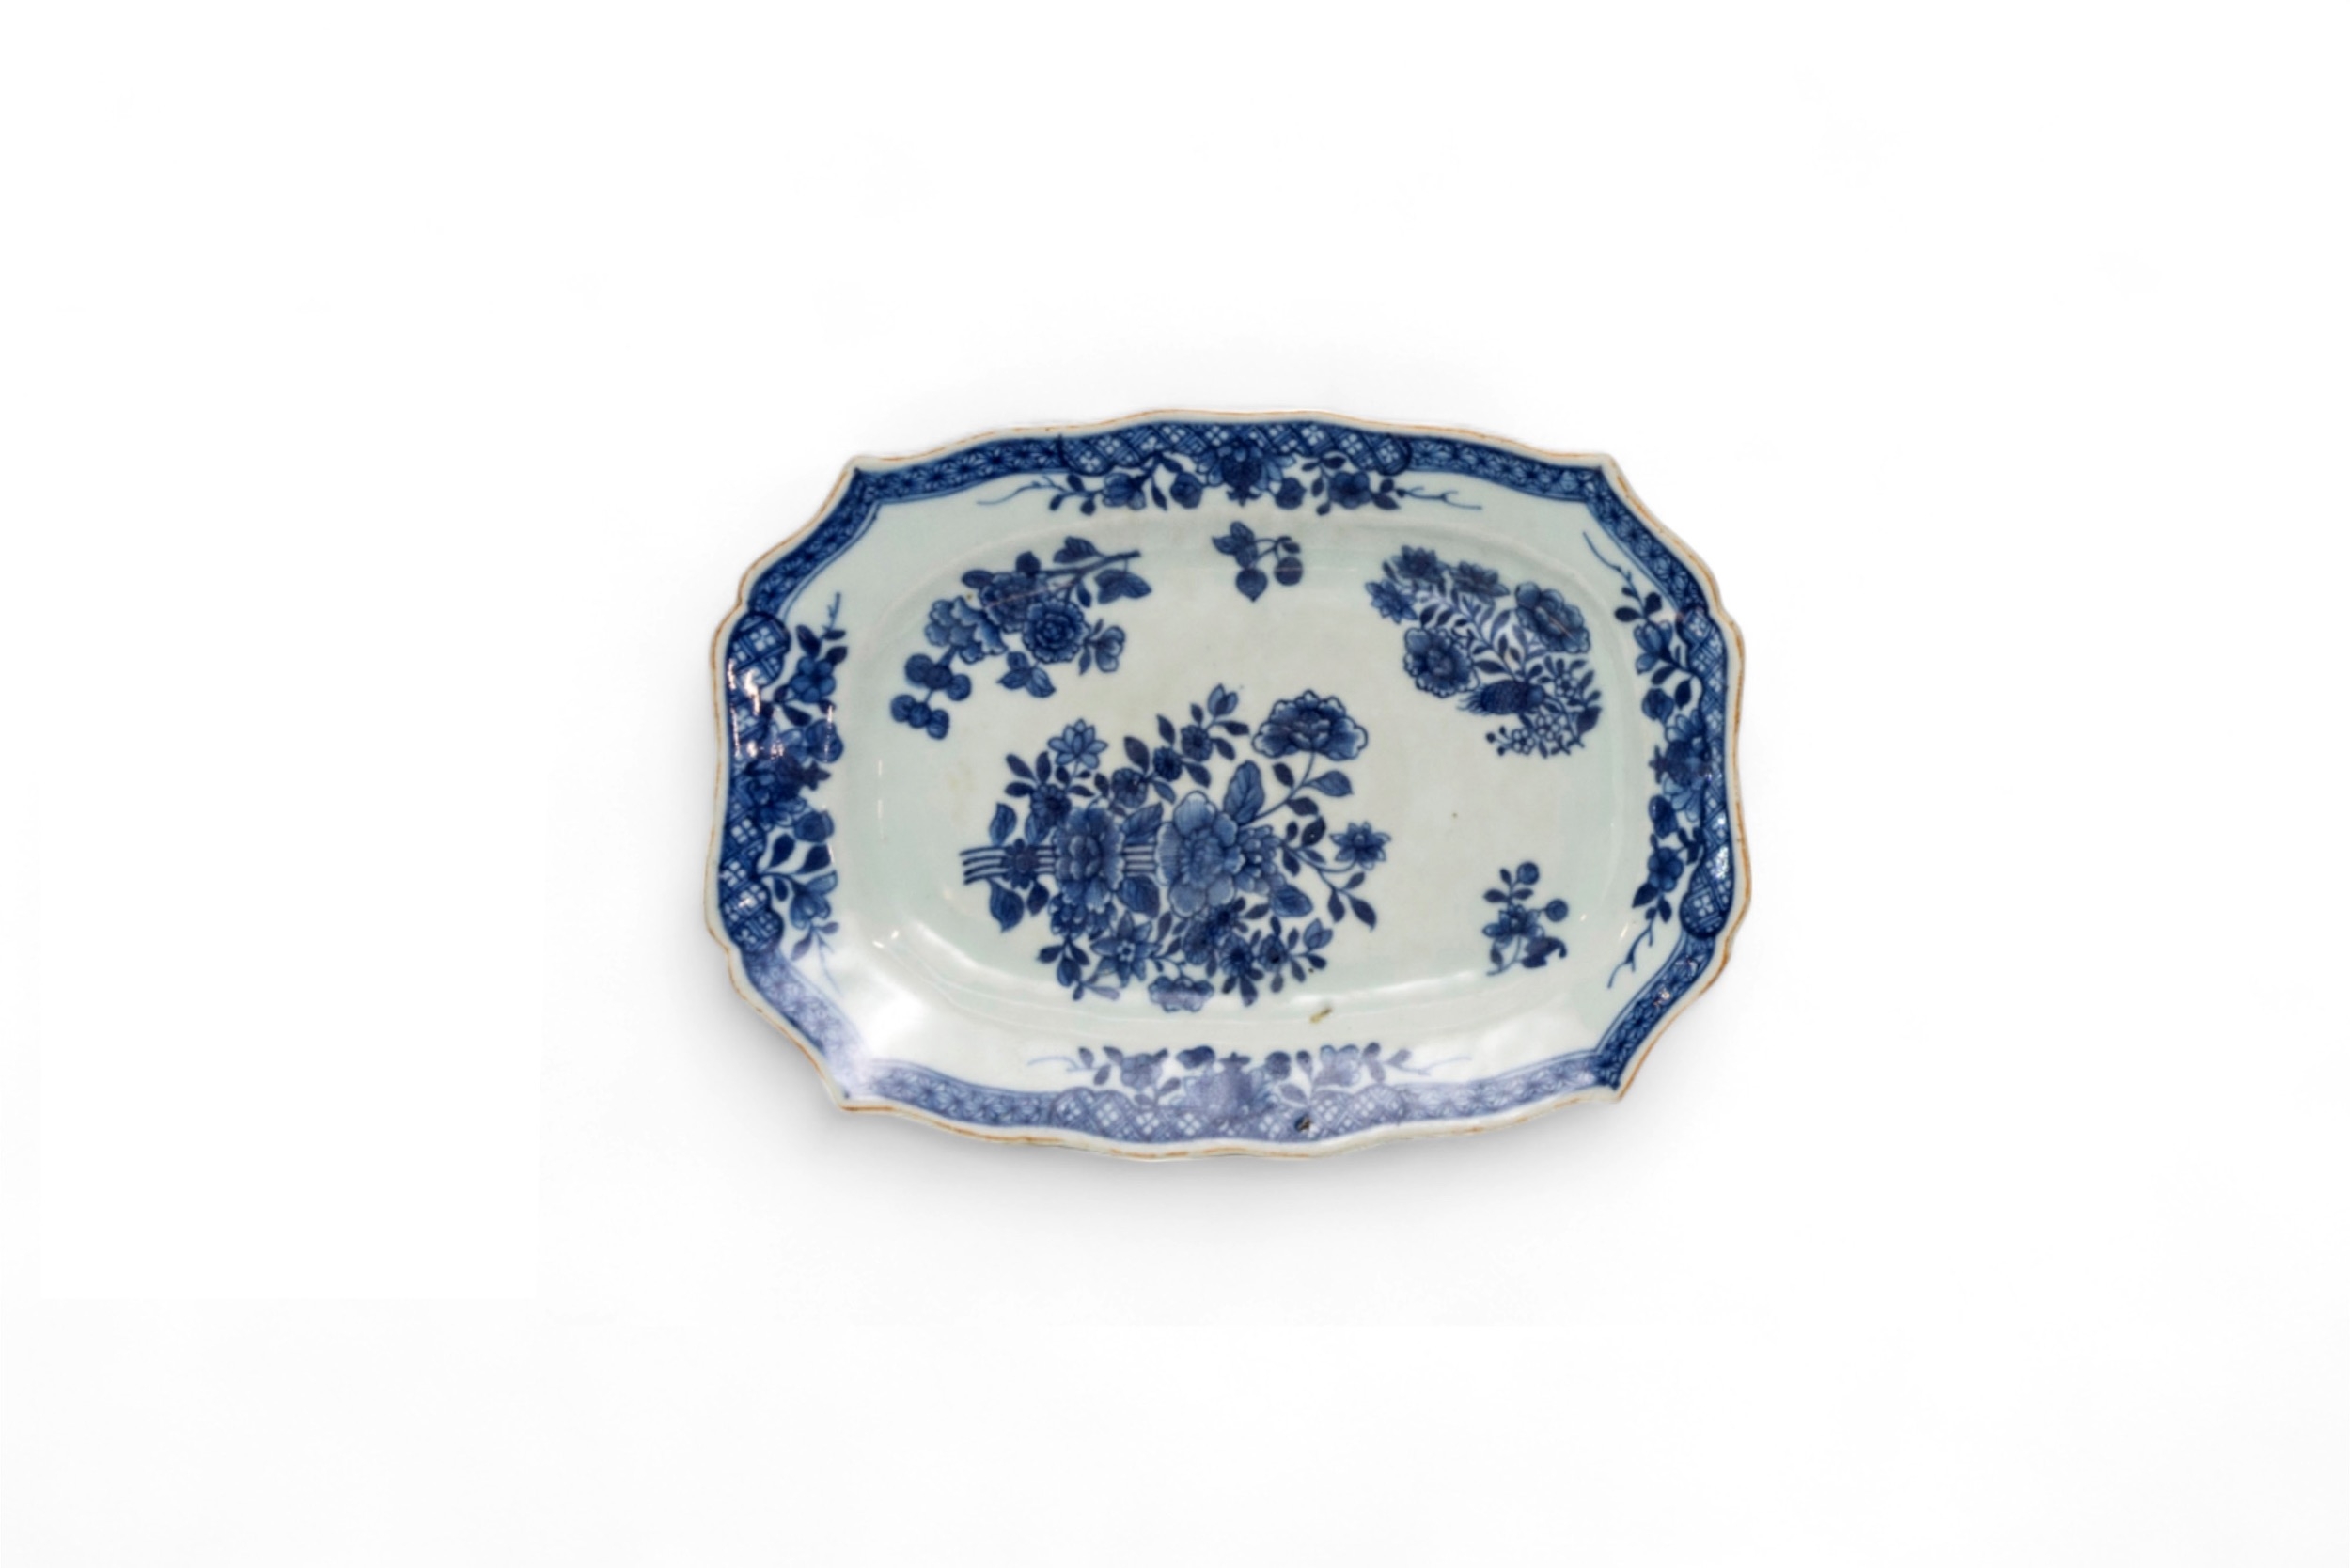 A GROUP OF FIFTEEN CHINESE BLUE AND WHITE SERVING DISHES QING DYNASTY, 18TH CENTURY largestest - Image 5 of 10